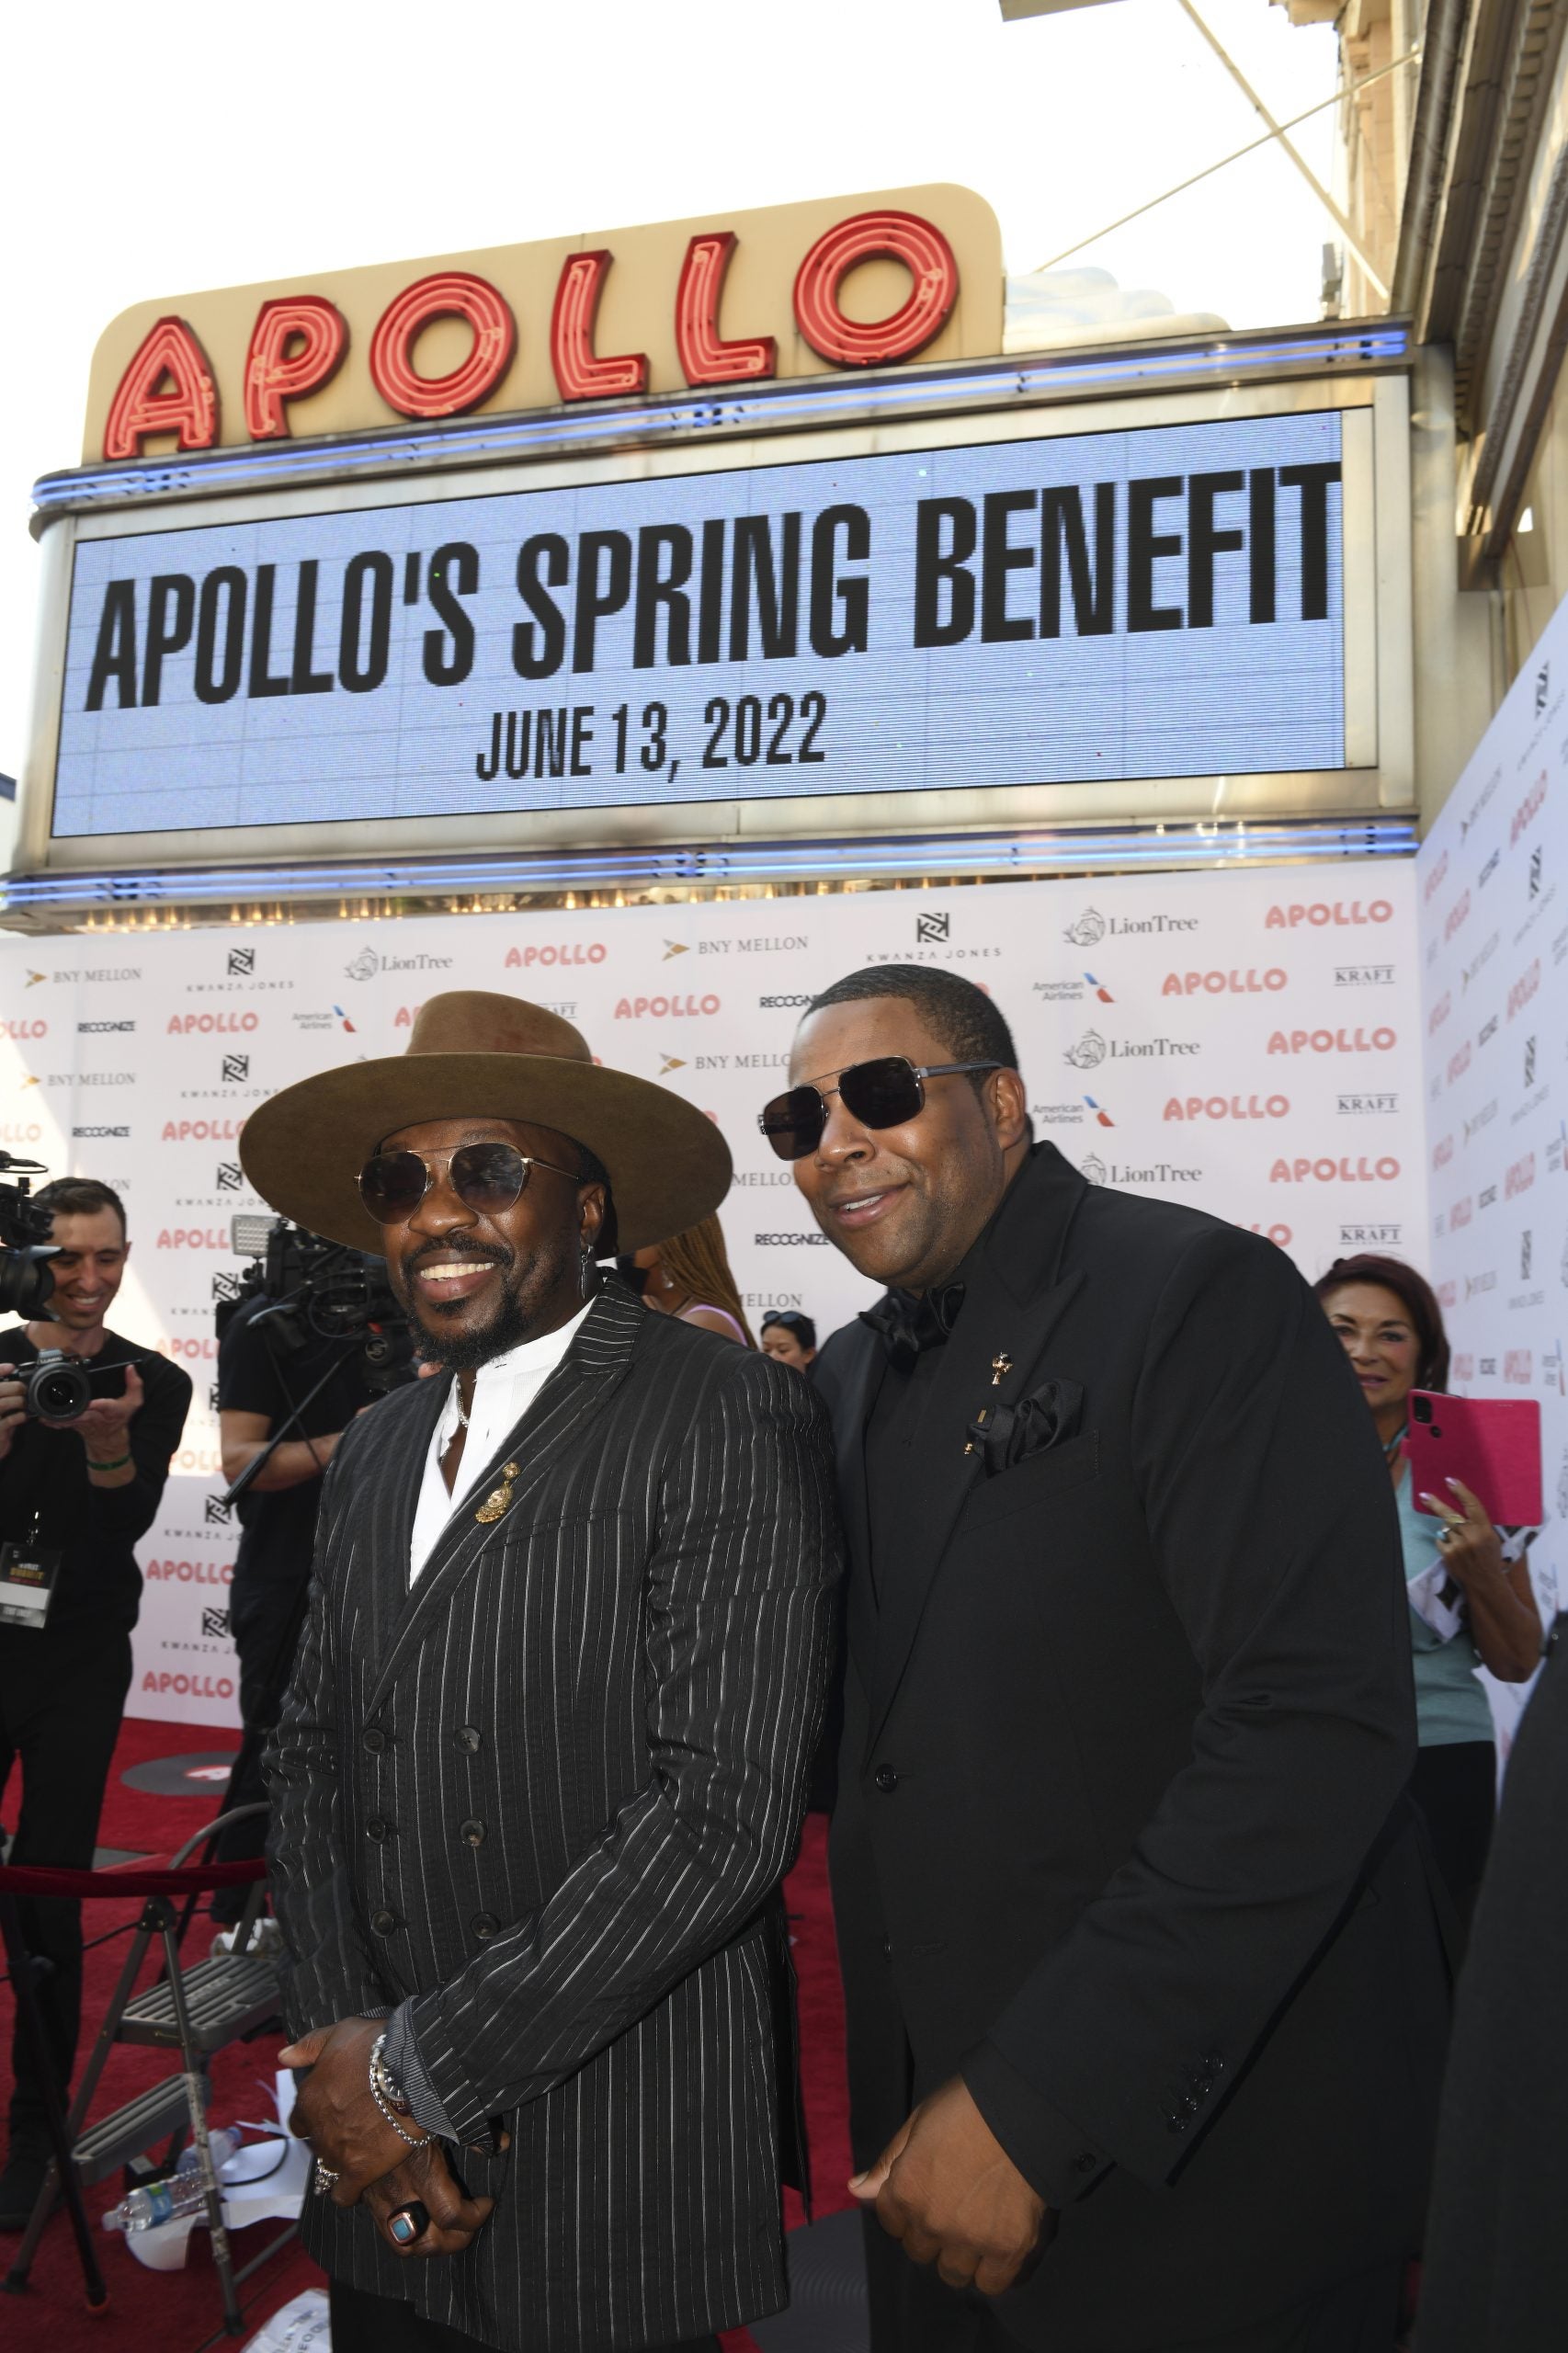 Tyler Perry Honored With Impact Award At 2022 Apollo Spring Benefit, Gifts Theater $500k